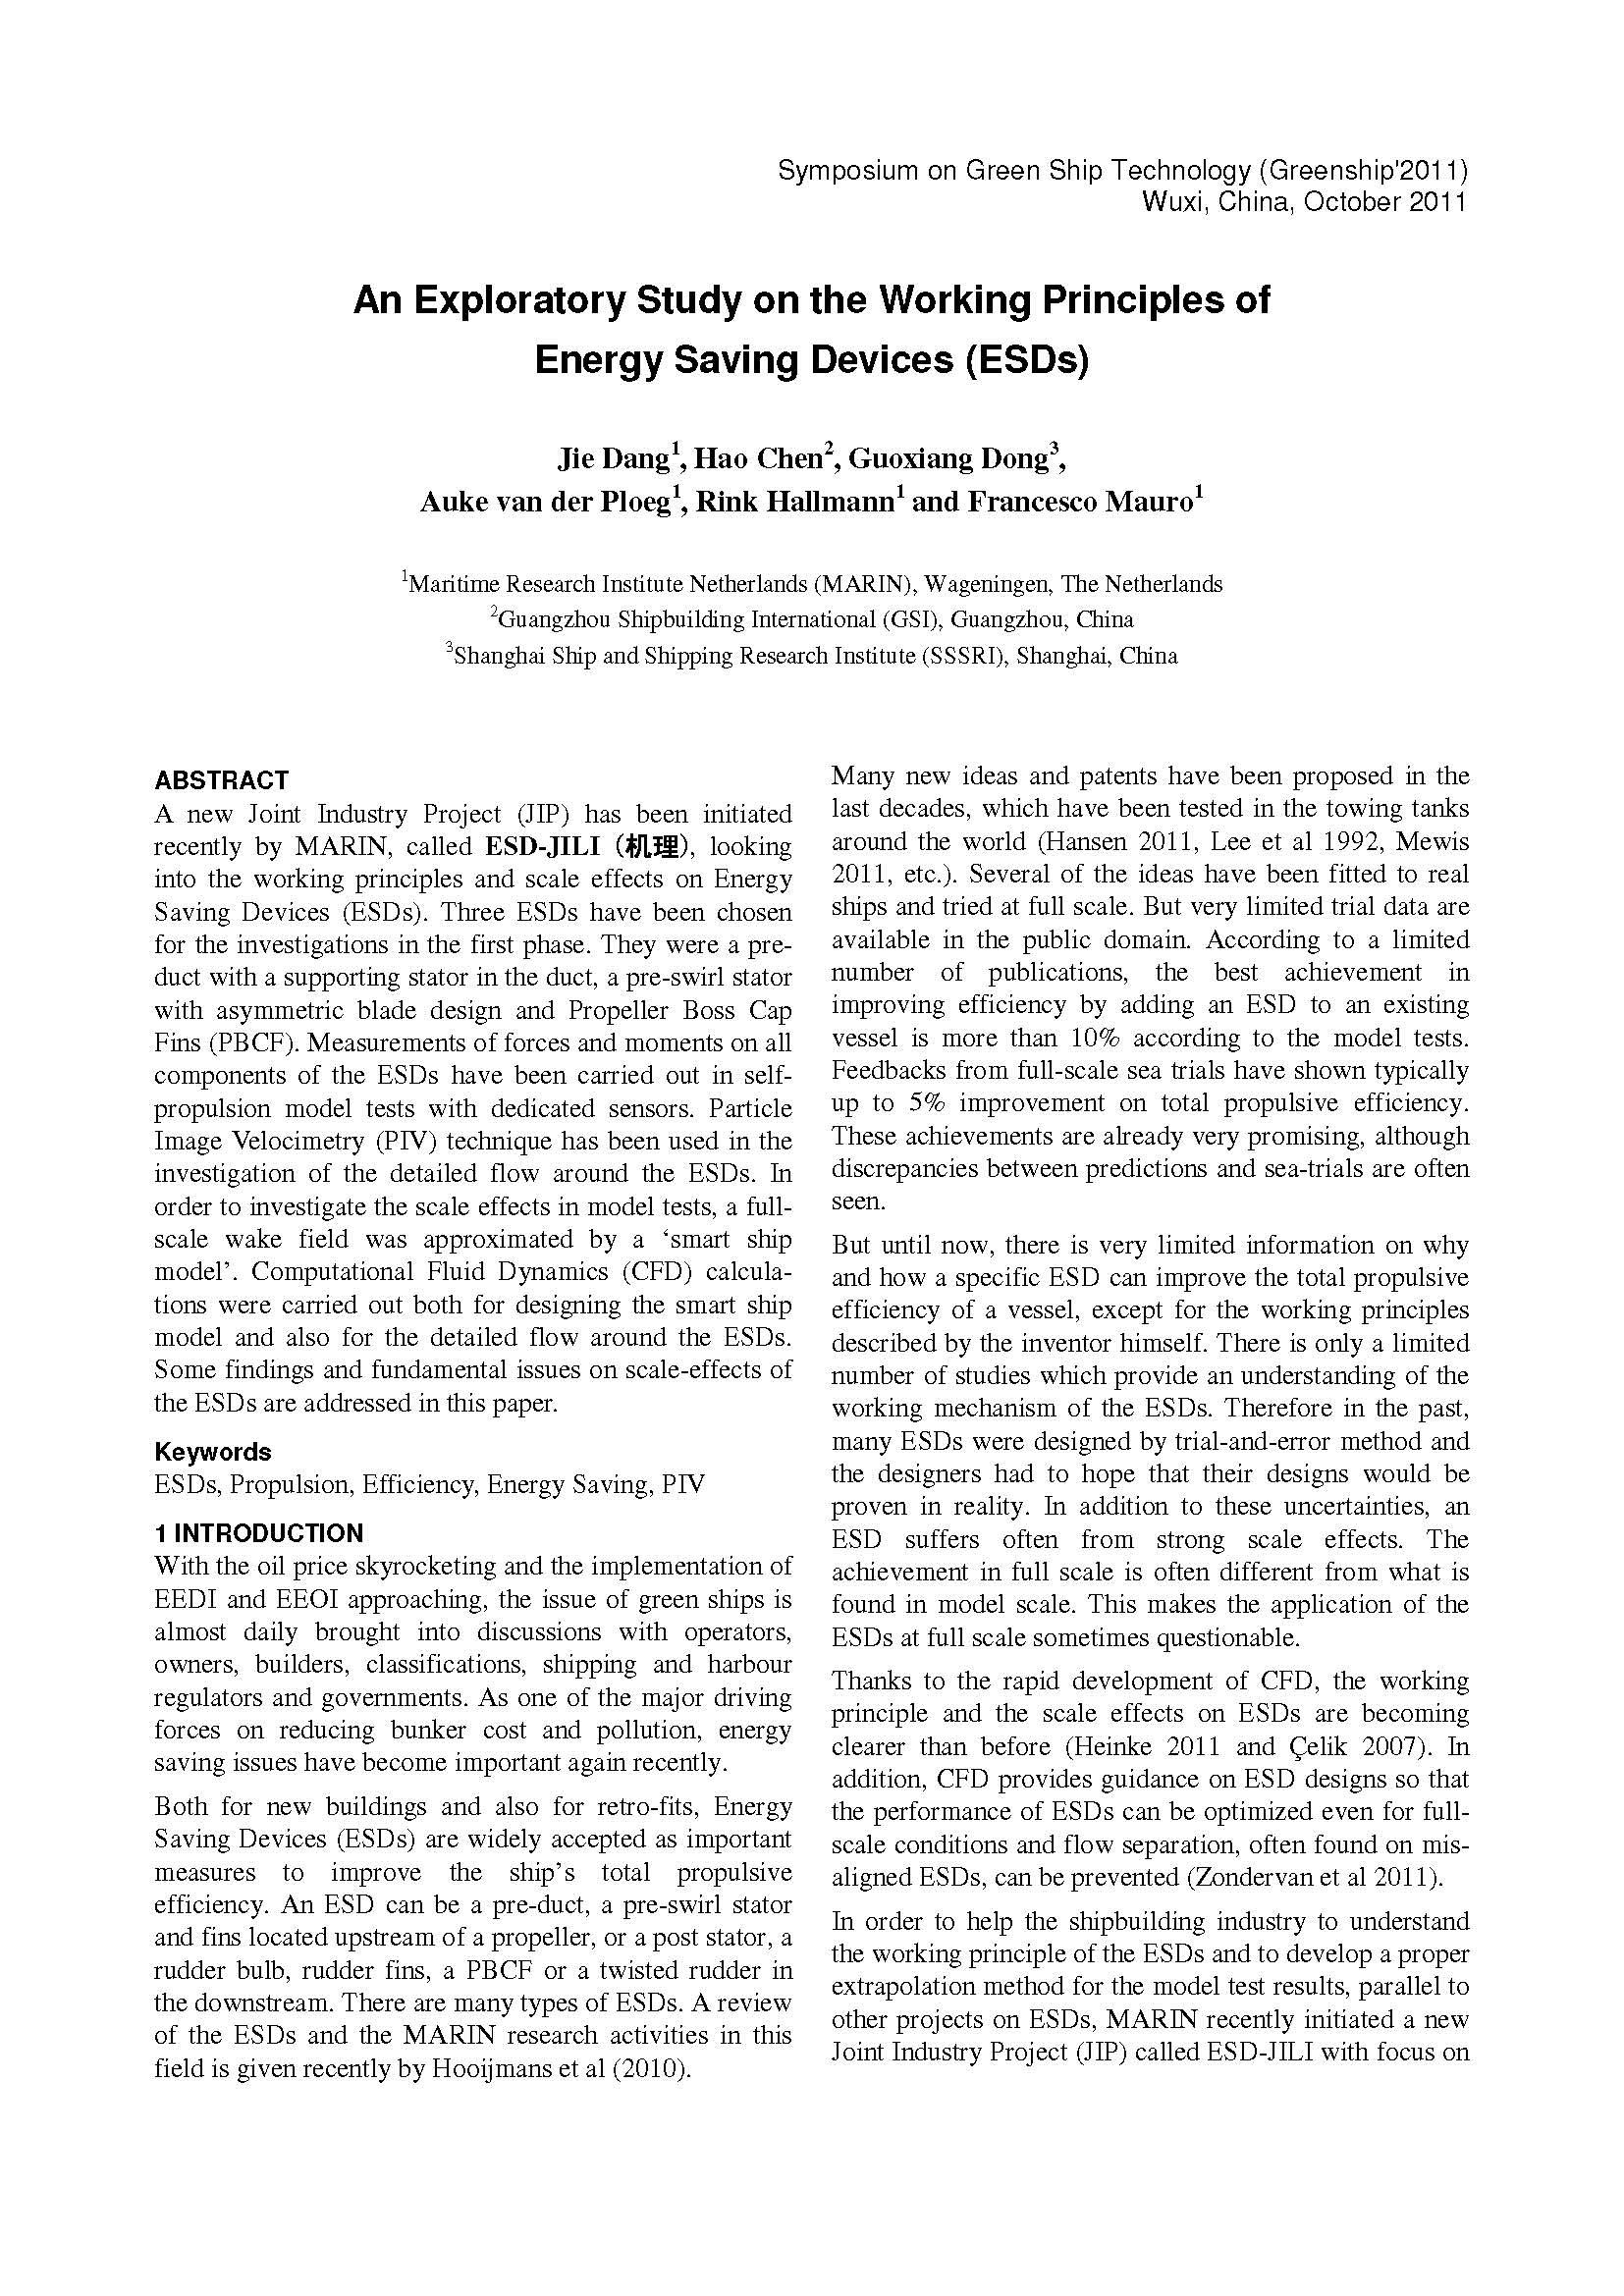 An Exploratory Study on the Working Principles of Energy Saving Devices (ESDs)